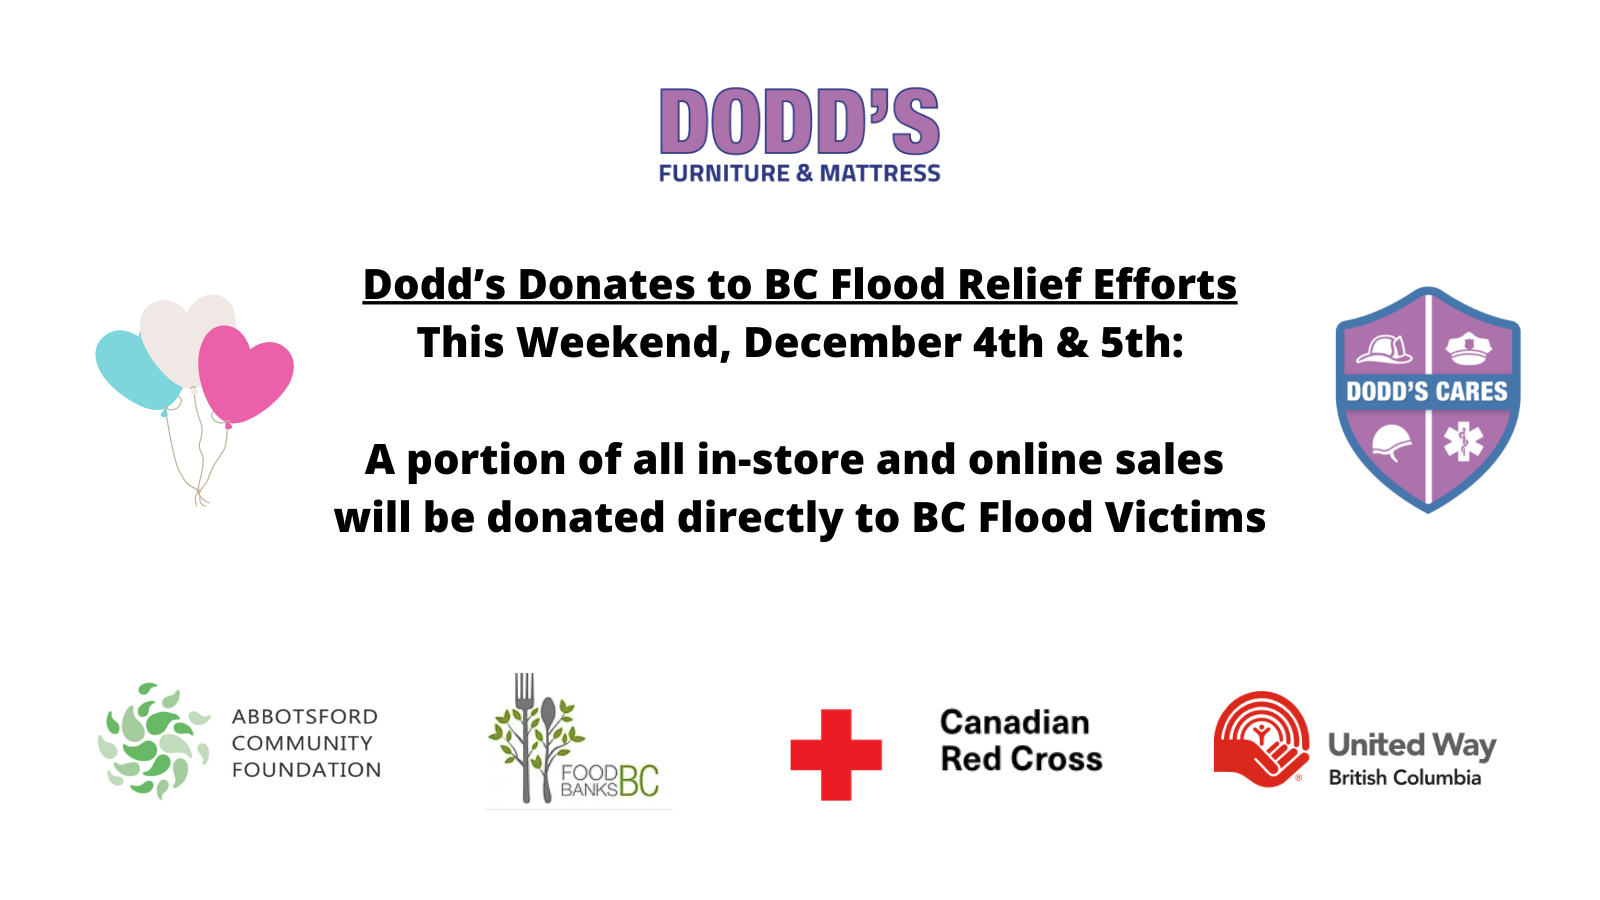 DODD'S DONATES TO BC FLOOD RELIEF EFFORTS